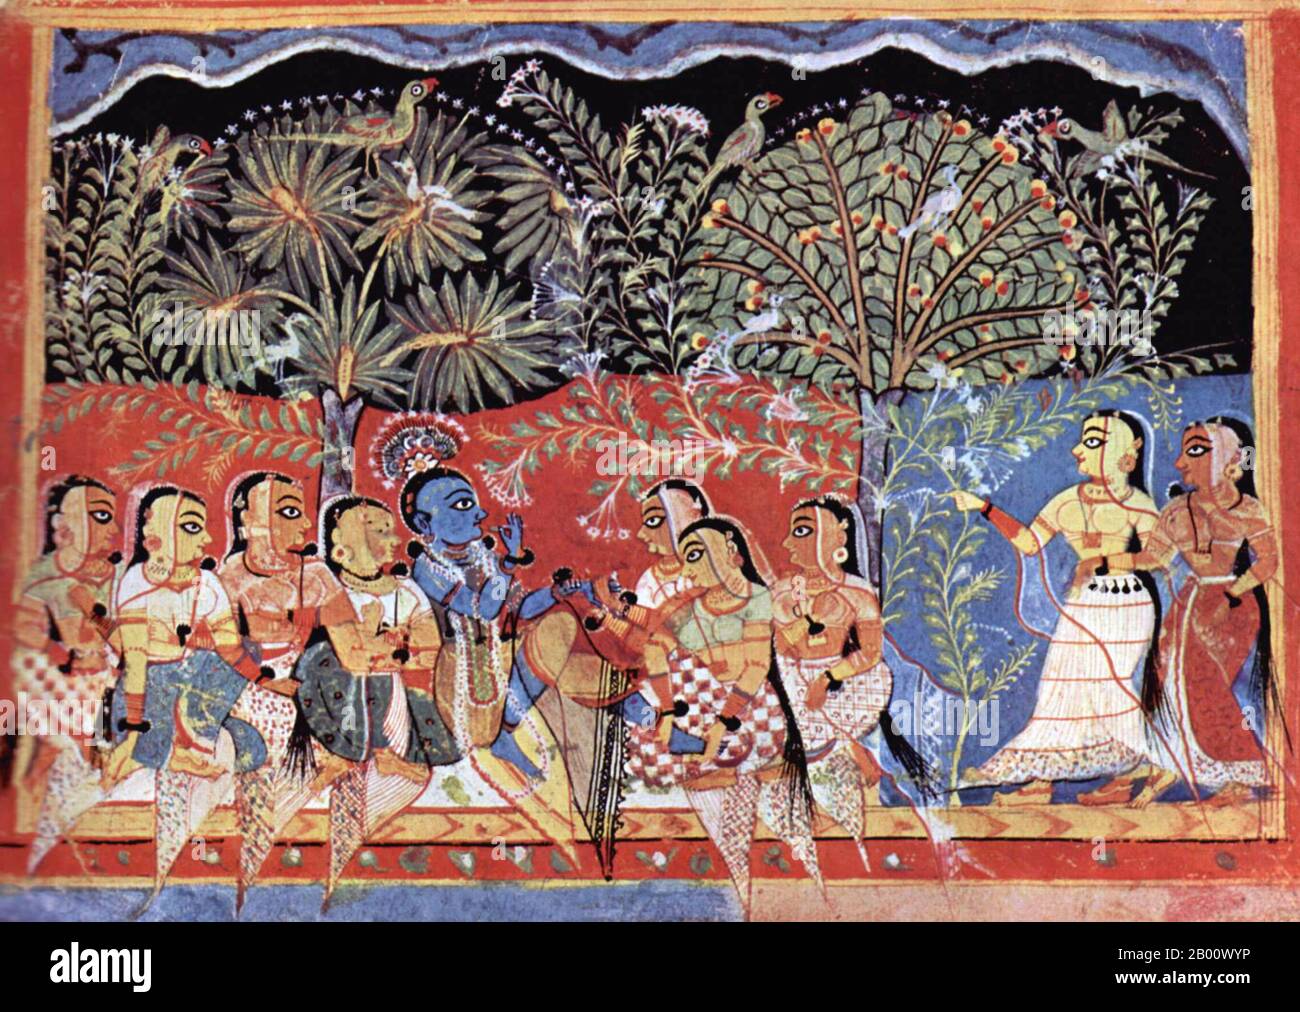 India: Gita Govinda manuscript, Krishna and the Gopis in the Forest (c. 1550).   The Gita Govinda is a work composed by the 12th-century poet, Jayadeva, who was born in Kenduli Sasan near Puri in Orissa. It describes the relationship between Krishna and the gopis (female cow herders) of Vrindavana, and in particular one gopi named Radha. This work has been of great importance in the development of the bhakti traditions of Hinduism. The Gita Govinda is organized into twelve chapters. Each chapter is further sub-divided into twenty four divisions called Prabandhas. Stock Photo